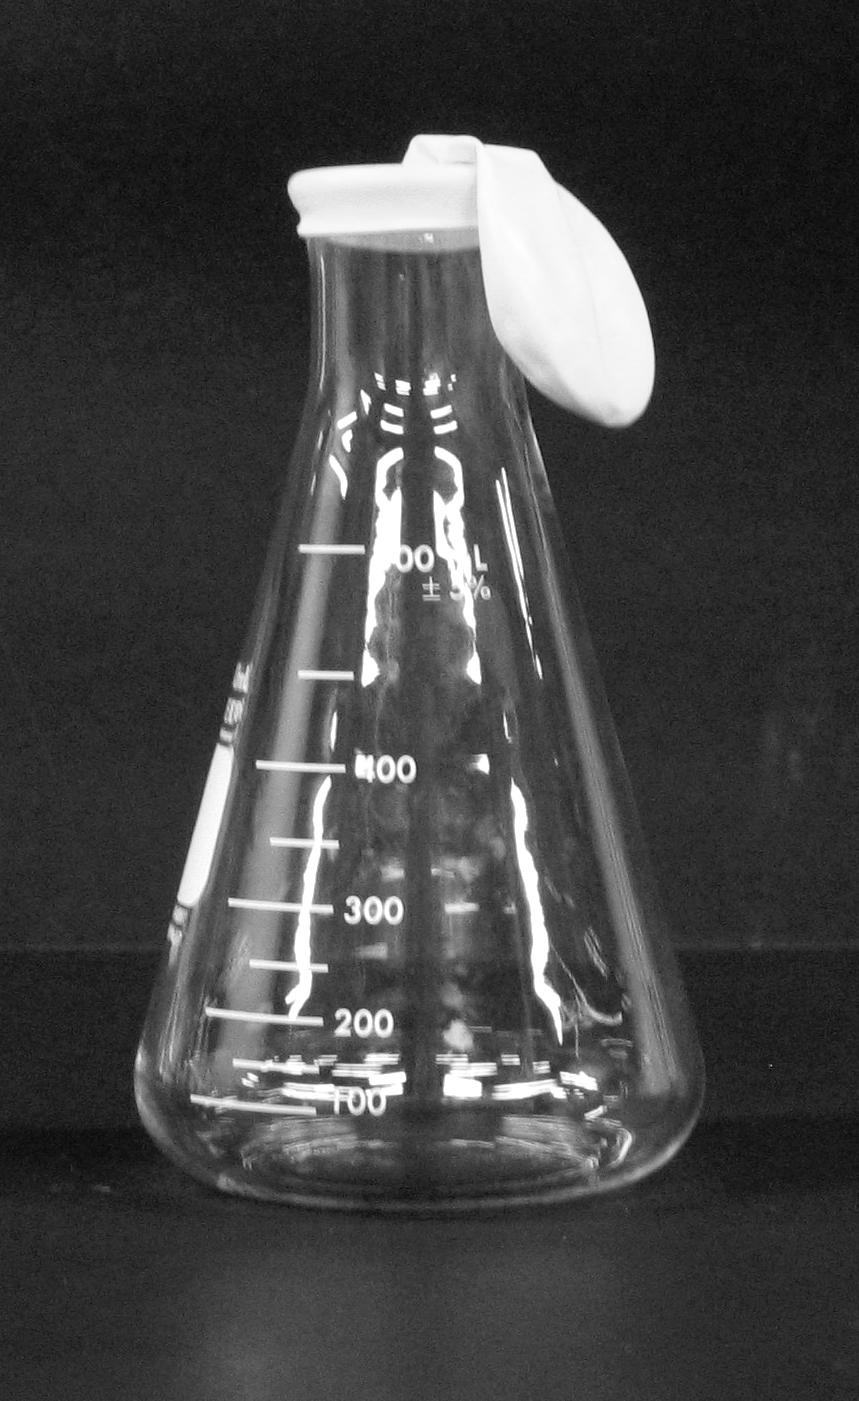 d. Stretch the open end of the balloon over the mouth of the Erlenmeyer flask until it securely covers the mouth of the flask.